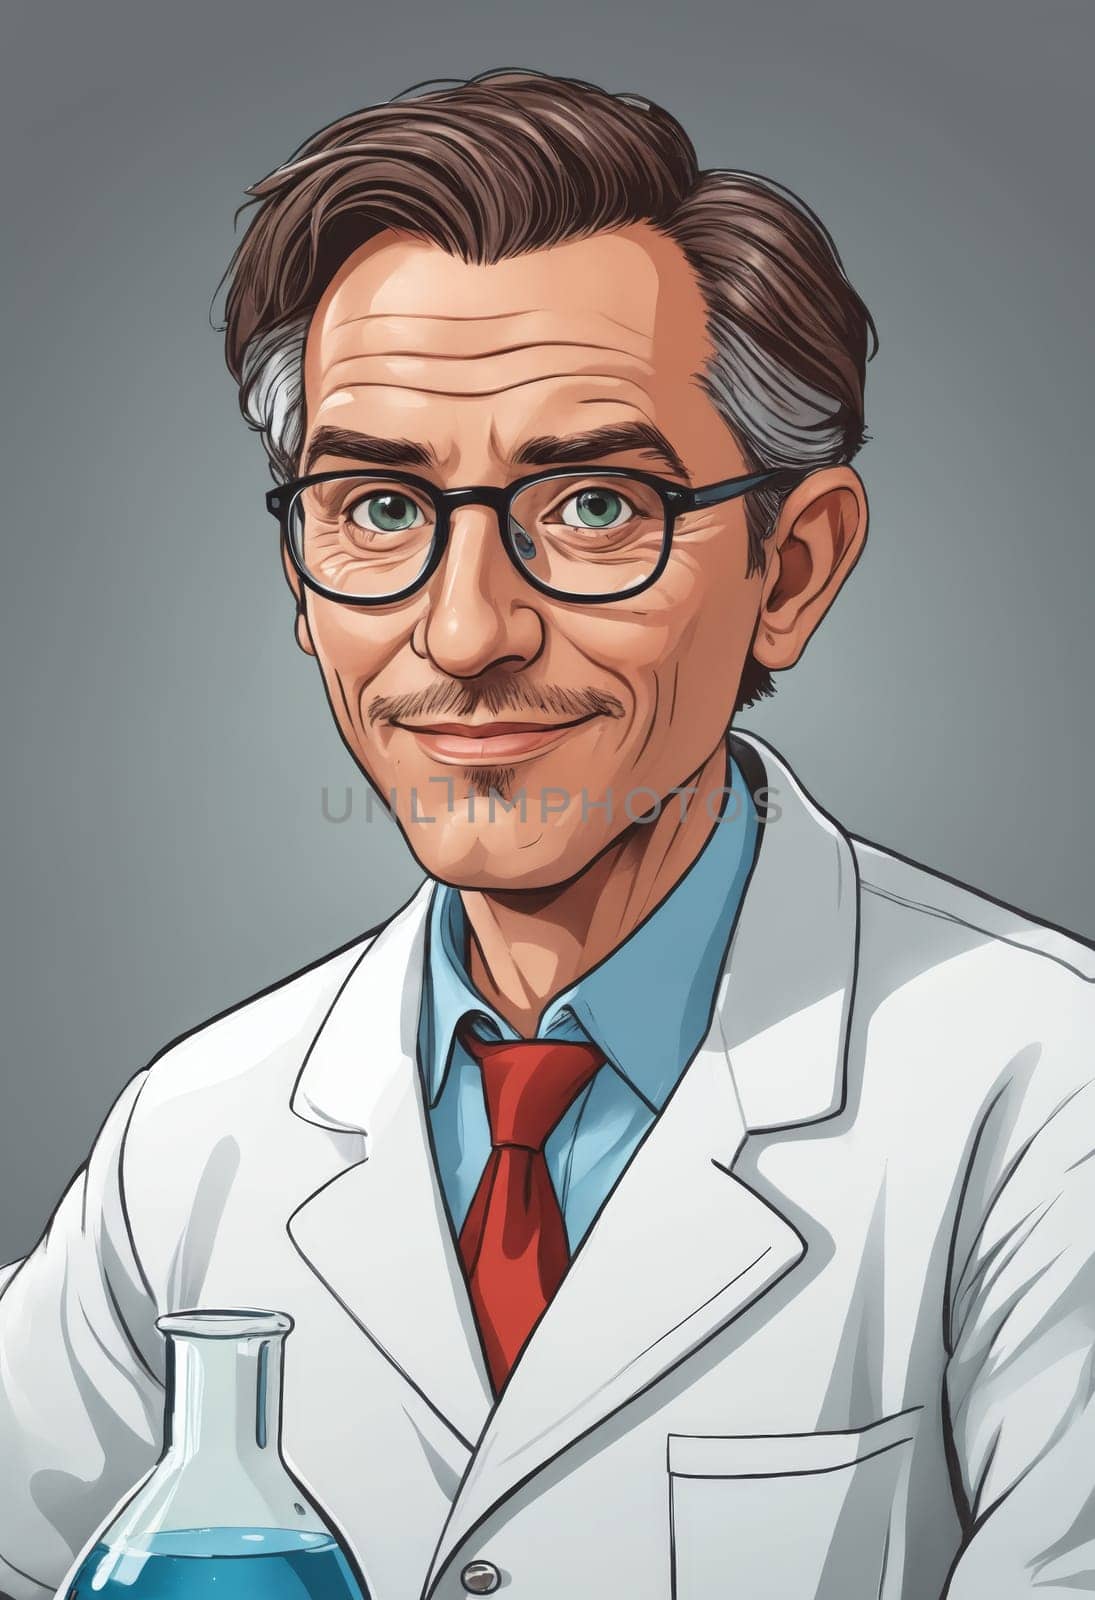 An image capturing a scientist's formal wear, contrasted with their casually styled white hair, reflecting a unique persona.